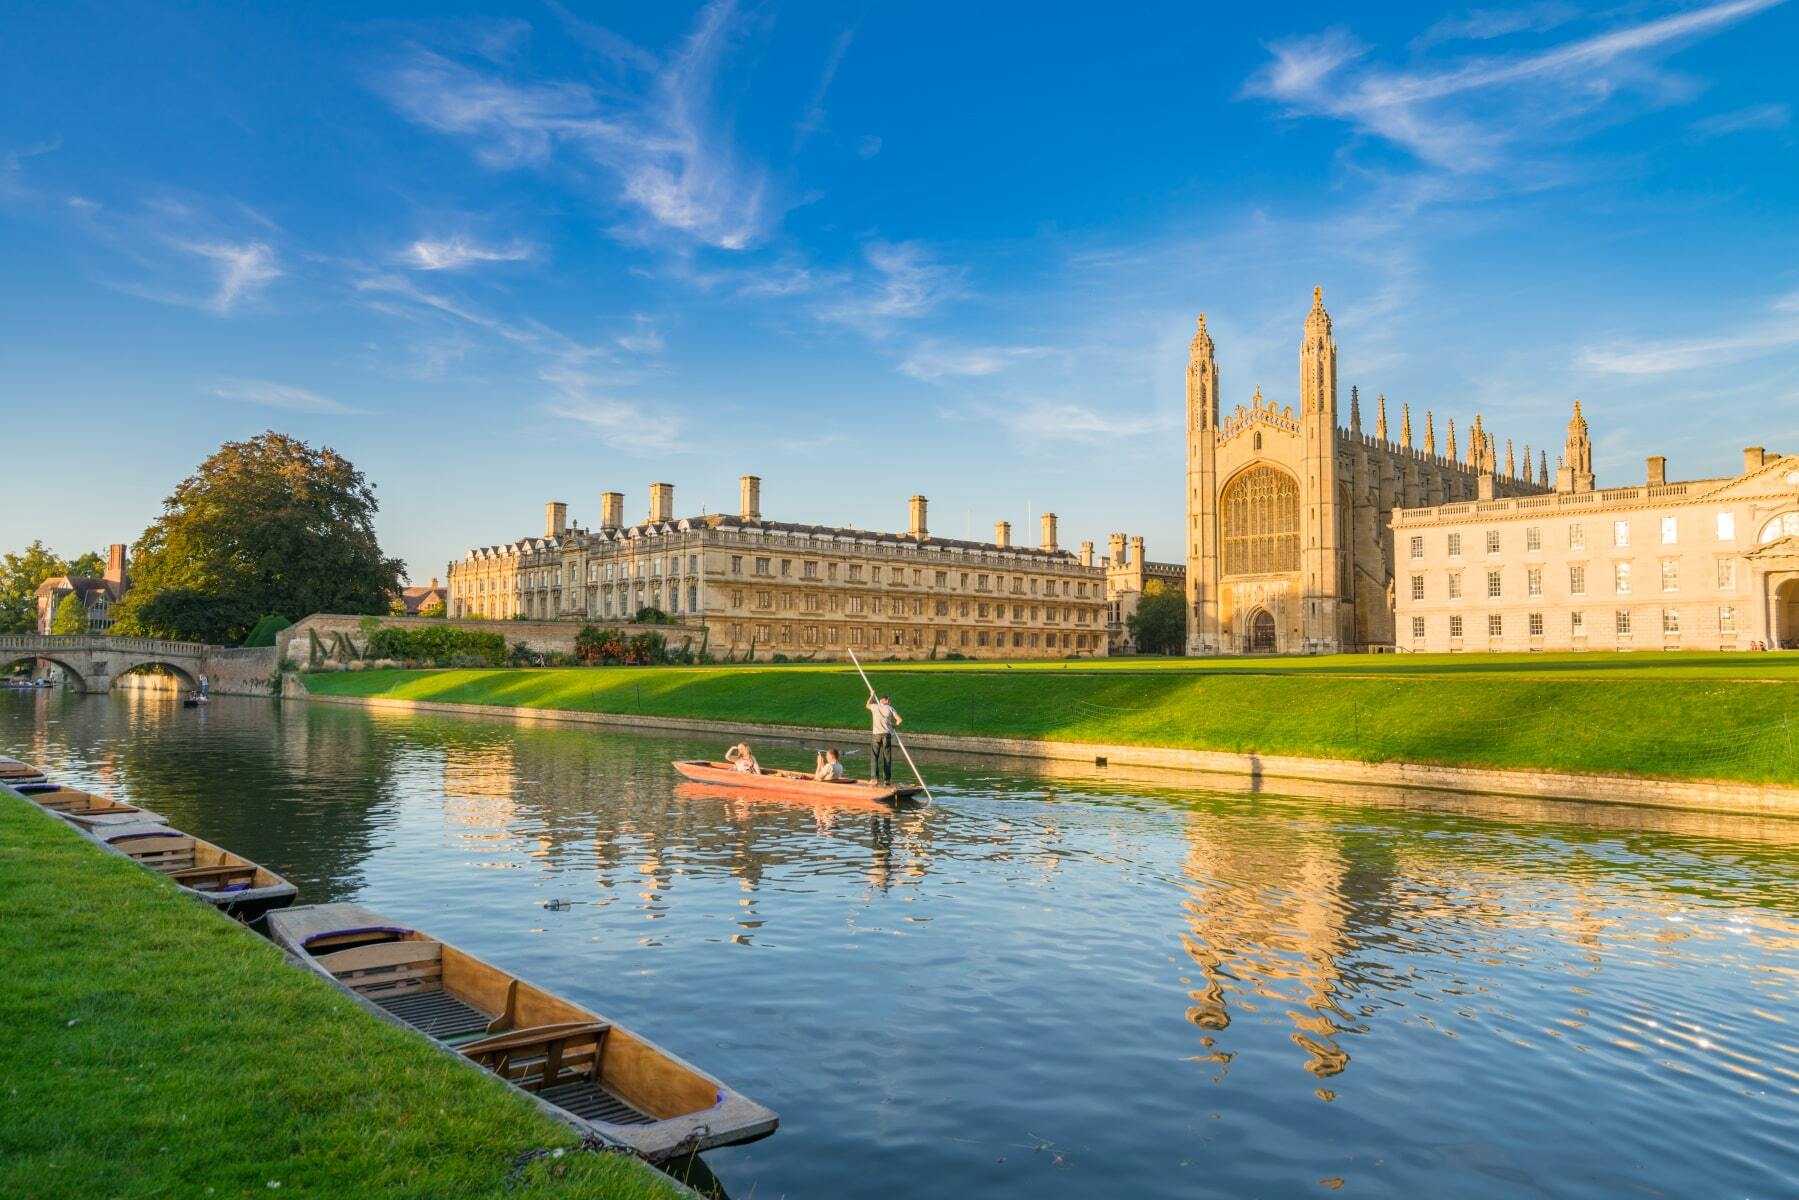 <p>Located near the River Cam, <a href="https://www.kings.cam.ac.uk/chapel" class="atom_link atom_valid" rel="noreferrer noopener">King’s College Chapel</a> is one destination you won’t want to miss if you’re passing through the university town of Cambridge. Take in one of the country’s most beautiful historic buildings and listen to the choir sing before you visit some or all of the 30 other colleges that are part of this esteemed university.</p>